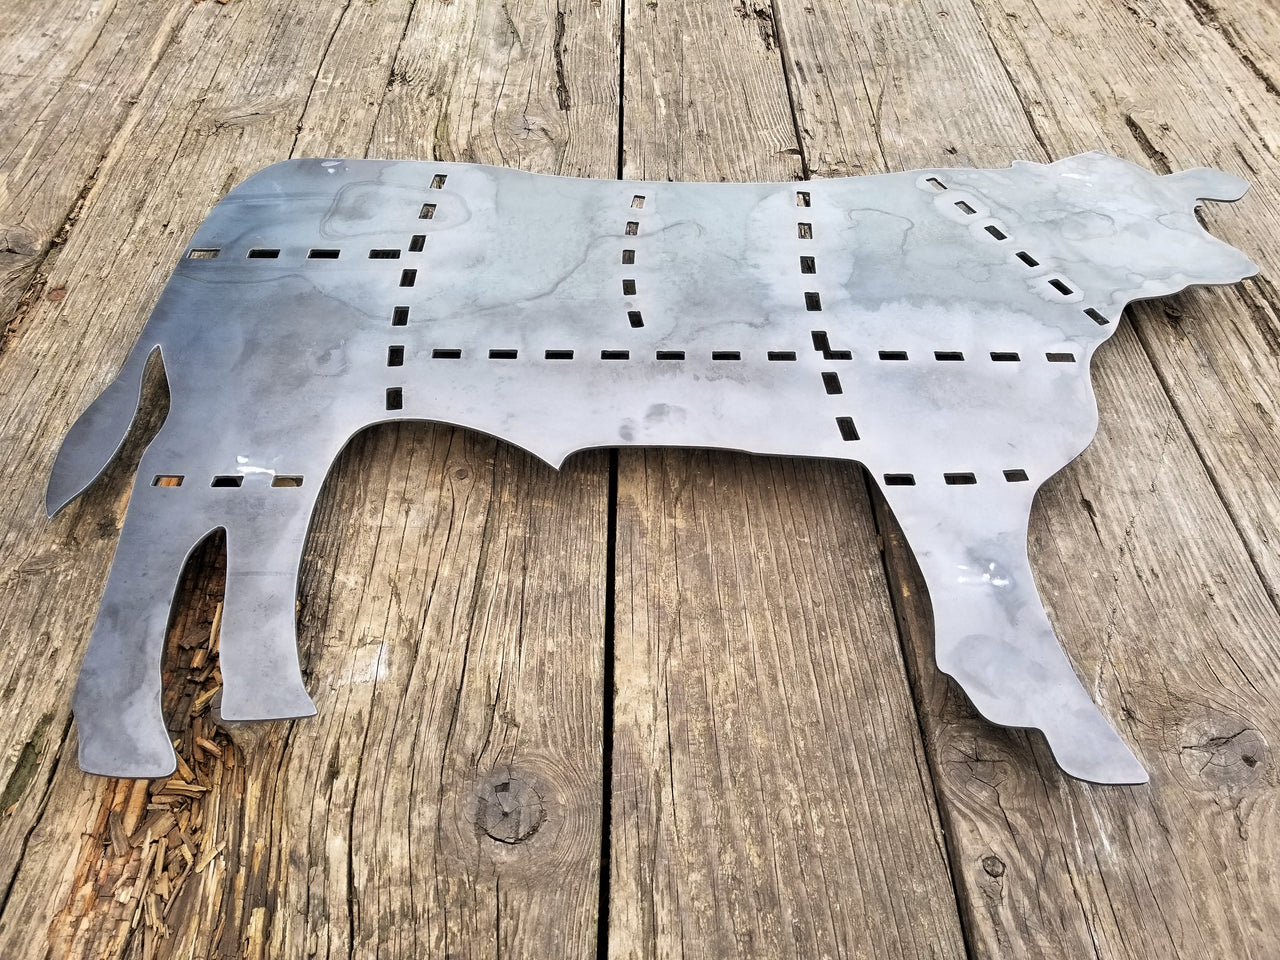 This is a metal sign in the shape of a cow with the cuts of beef outlined.